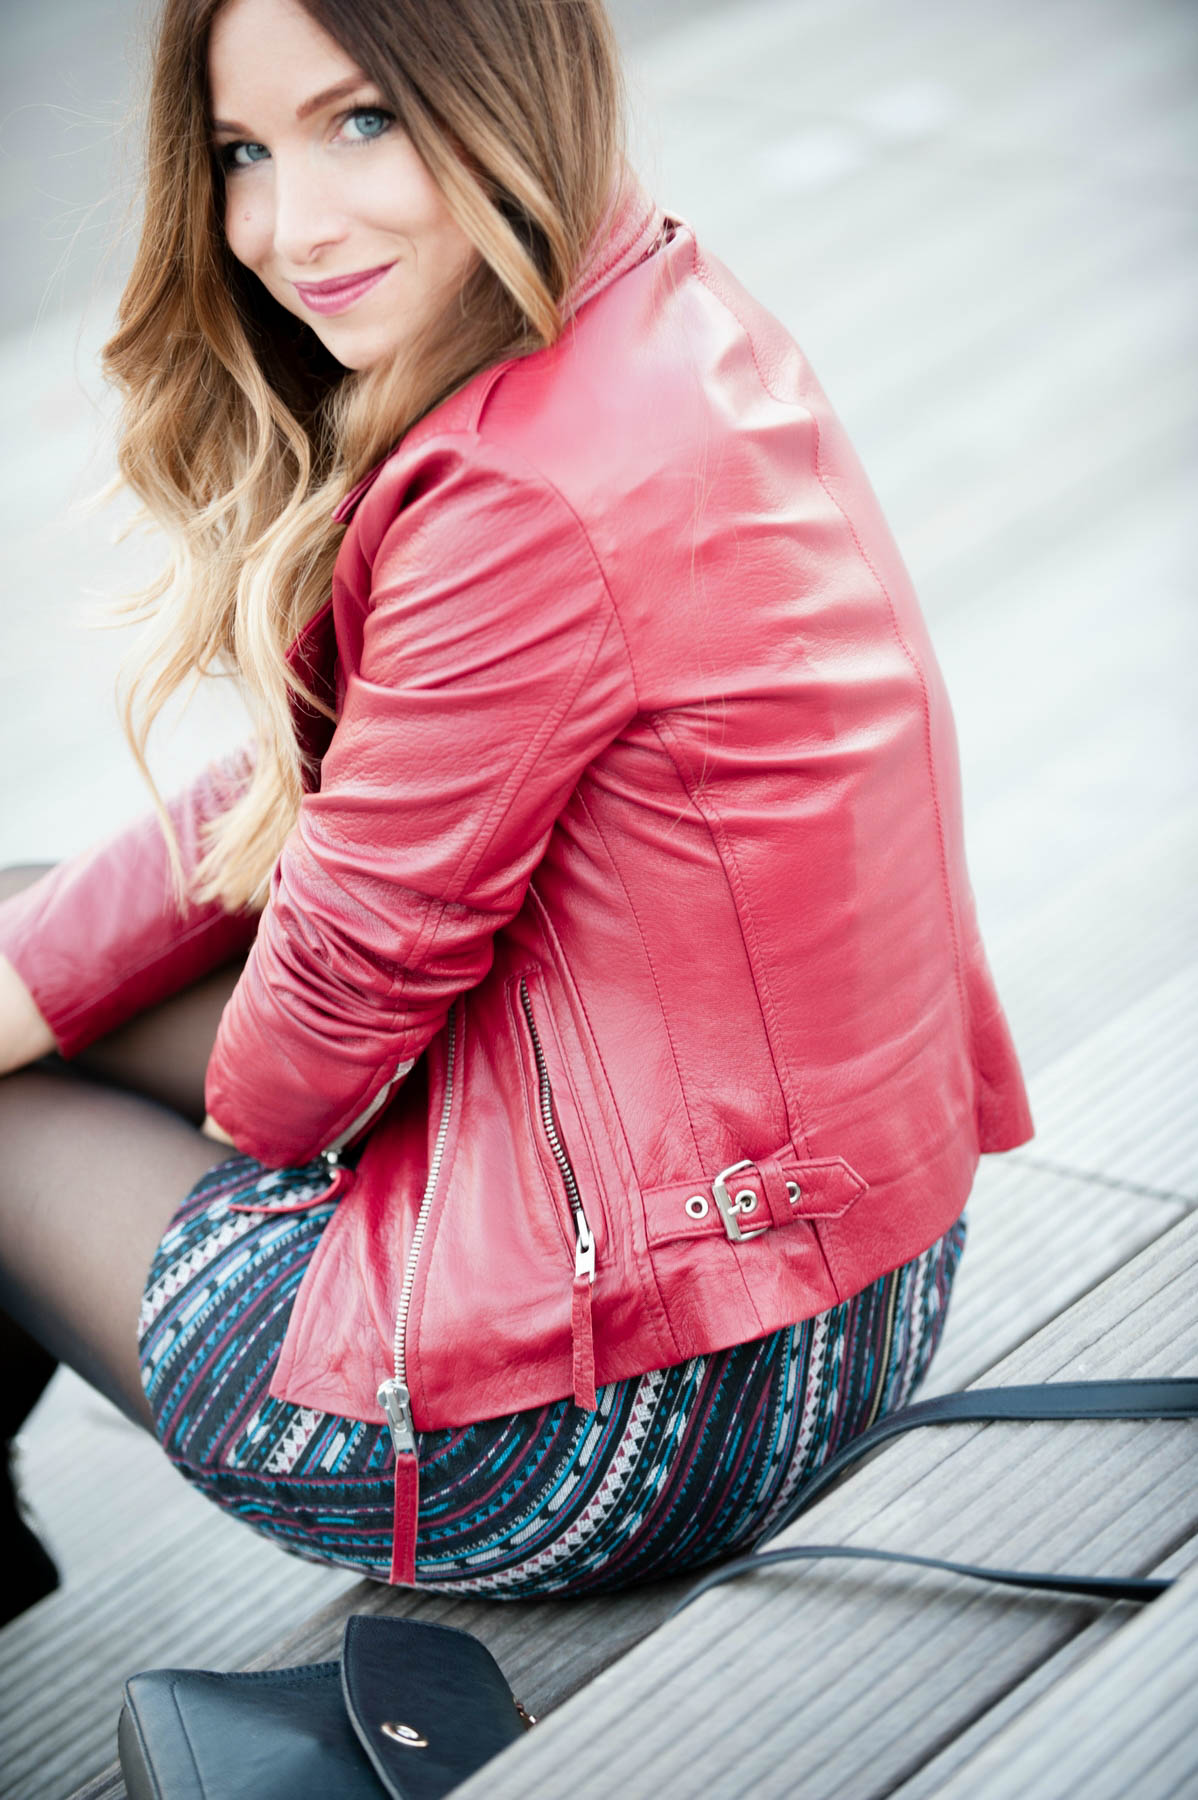 leather biker jacket red perfecto (1 sur 1)